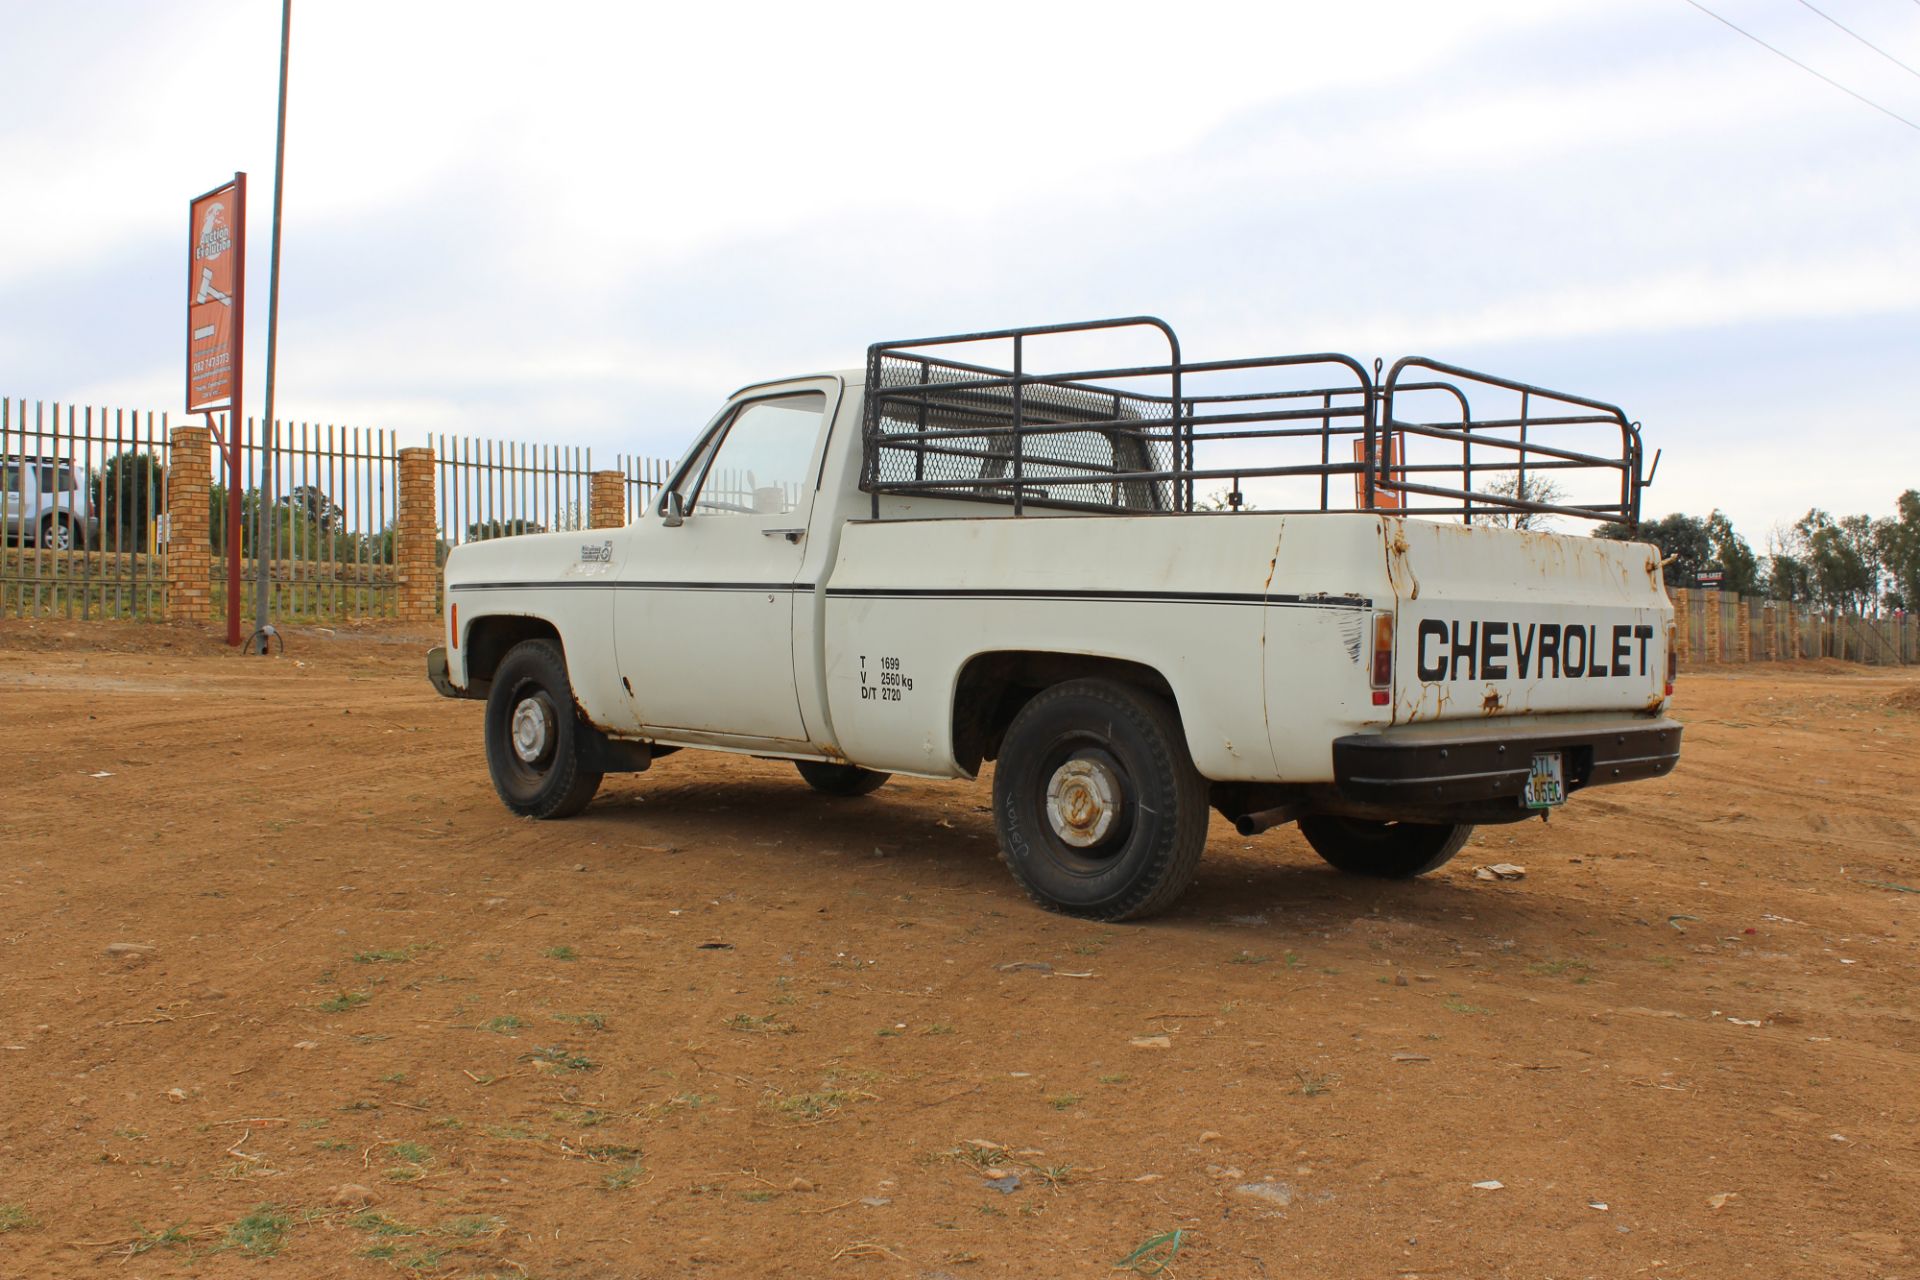 1974 CHEV SINGLE AXLE PICK-UP C10 - Image 3 of 6